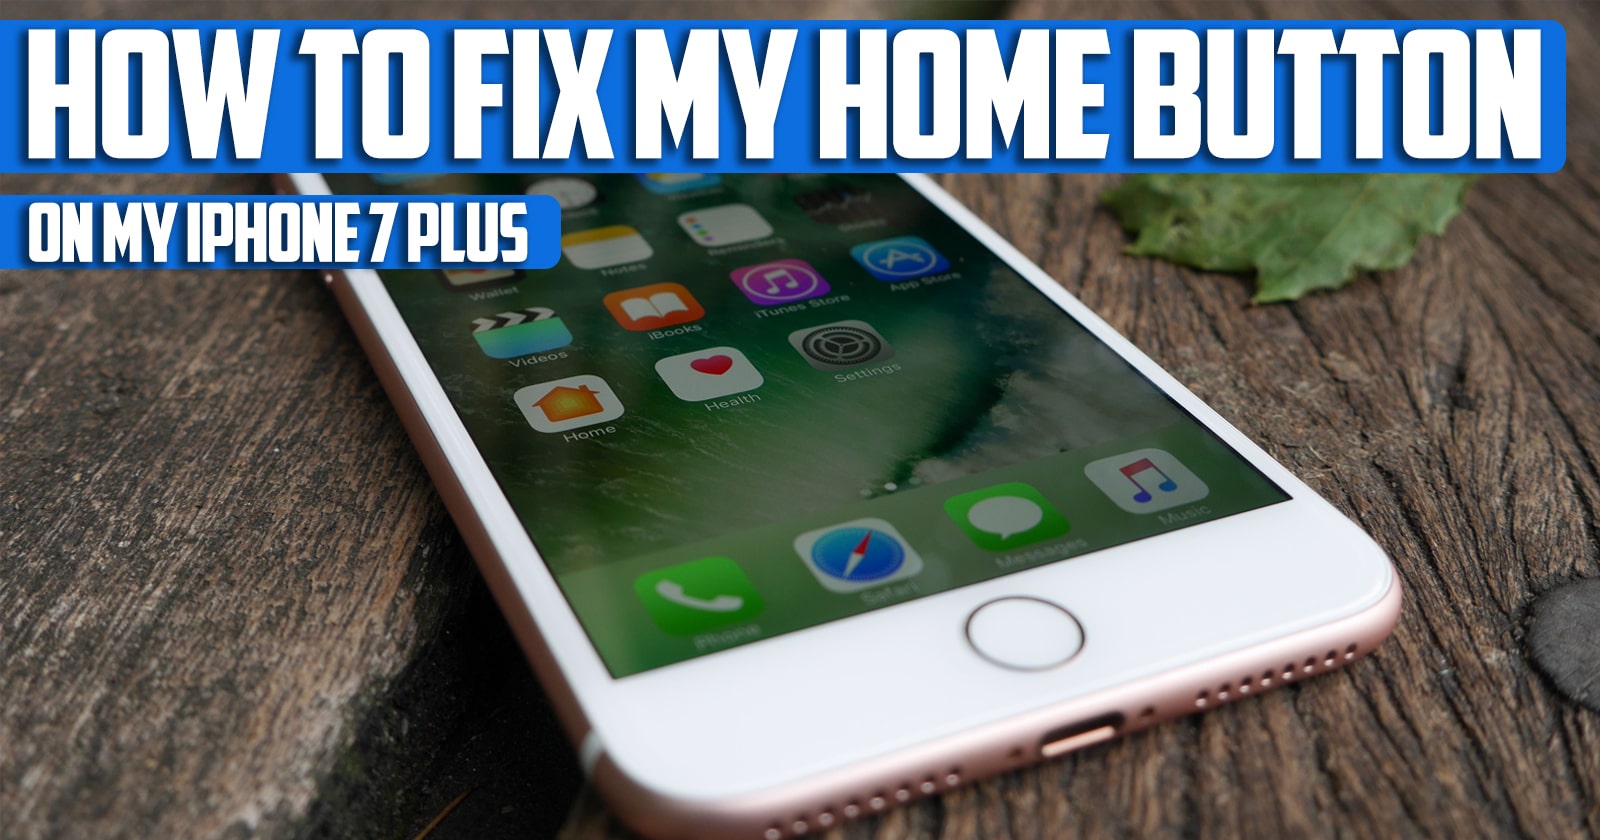 How to Fix My Home Button on My iPhone 7 Plus